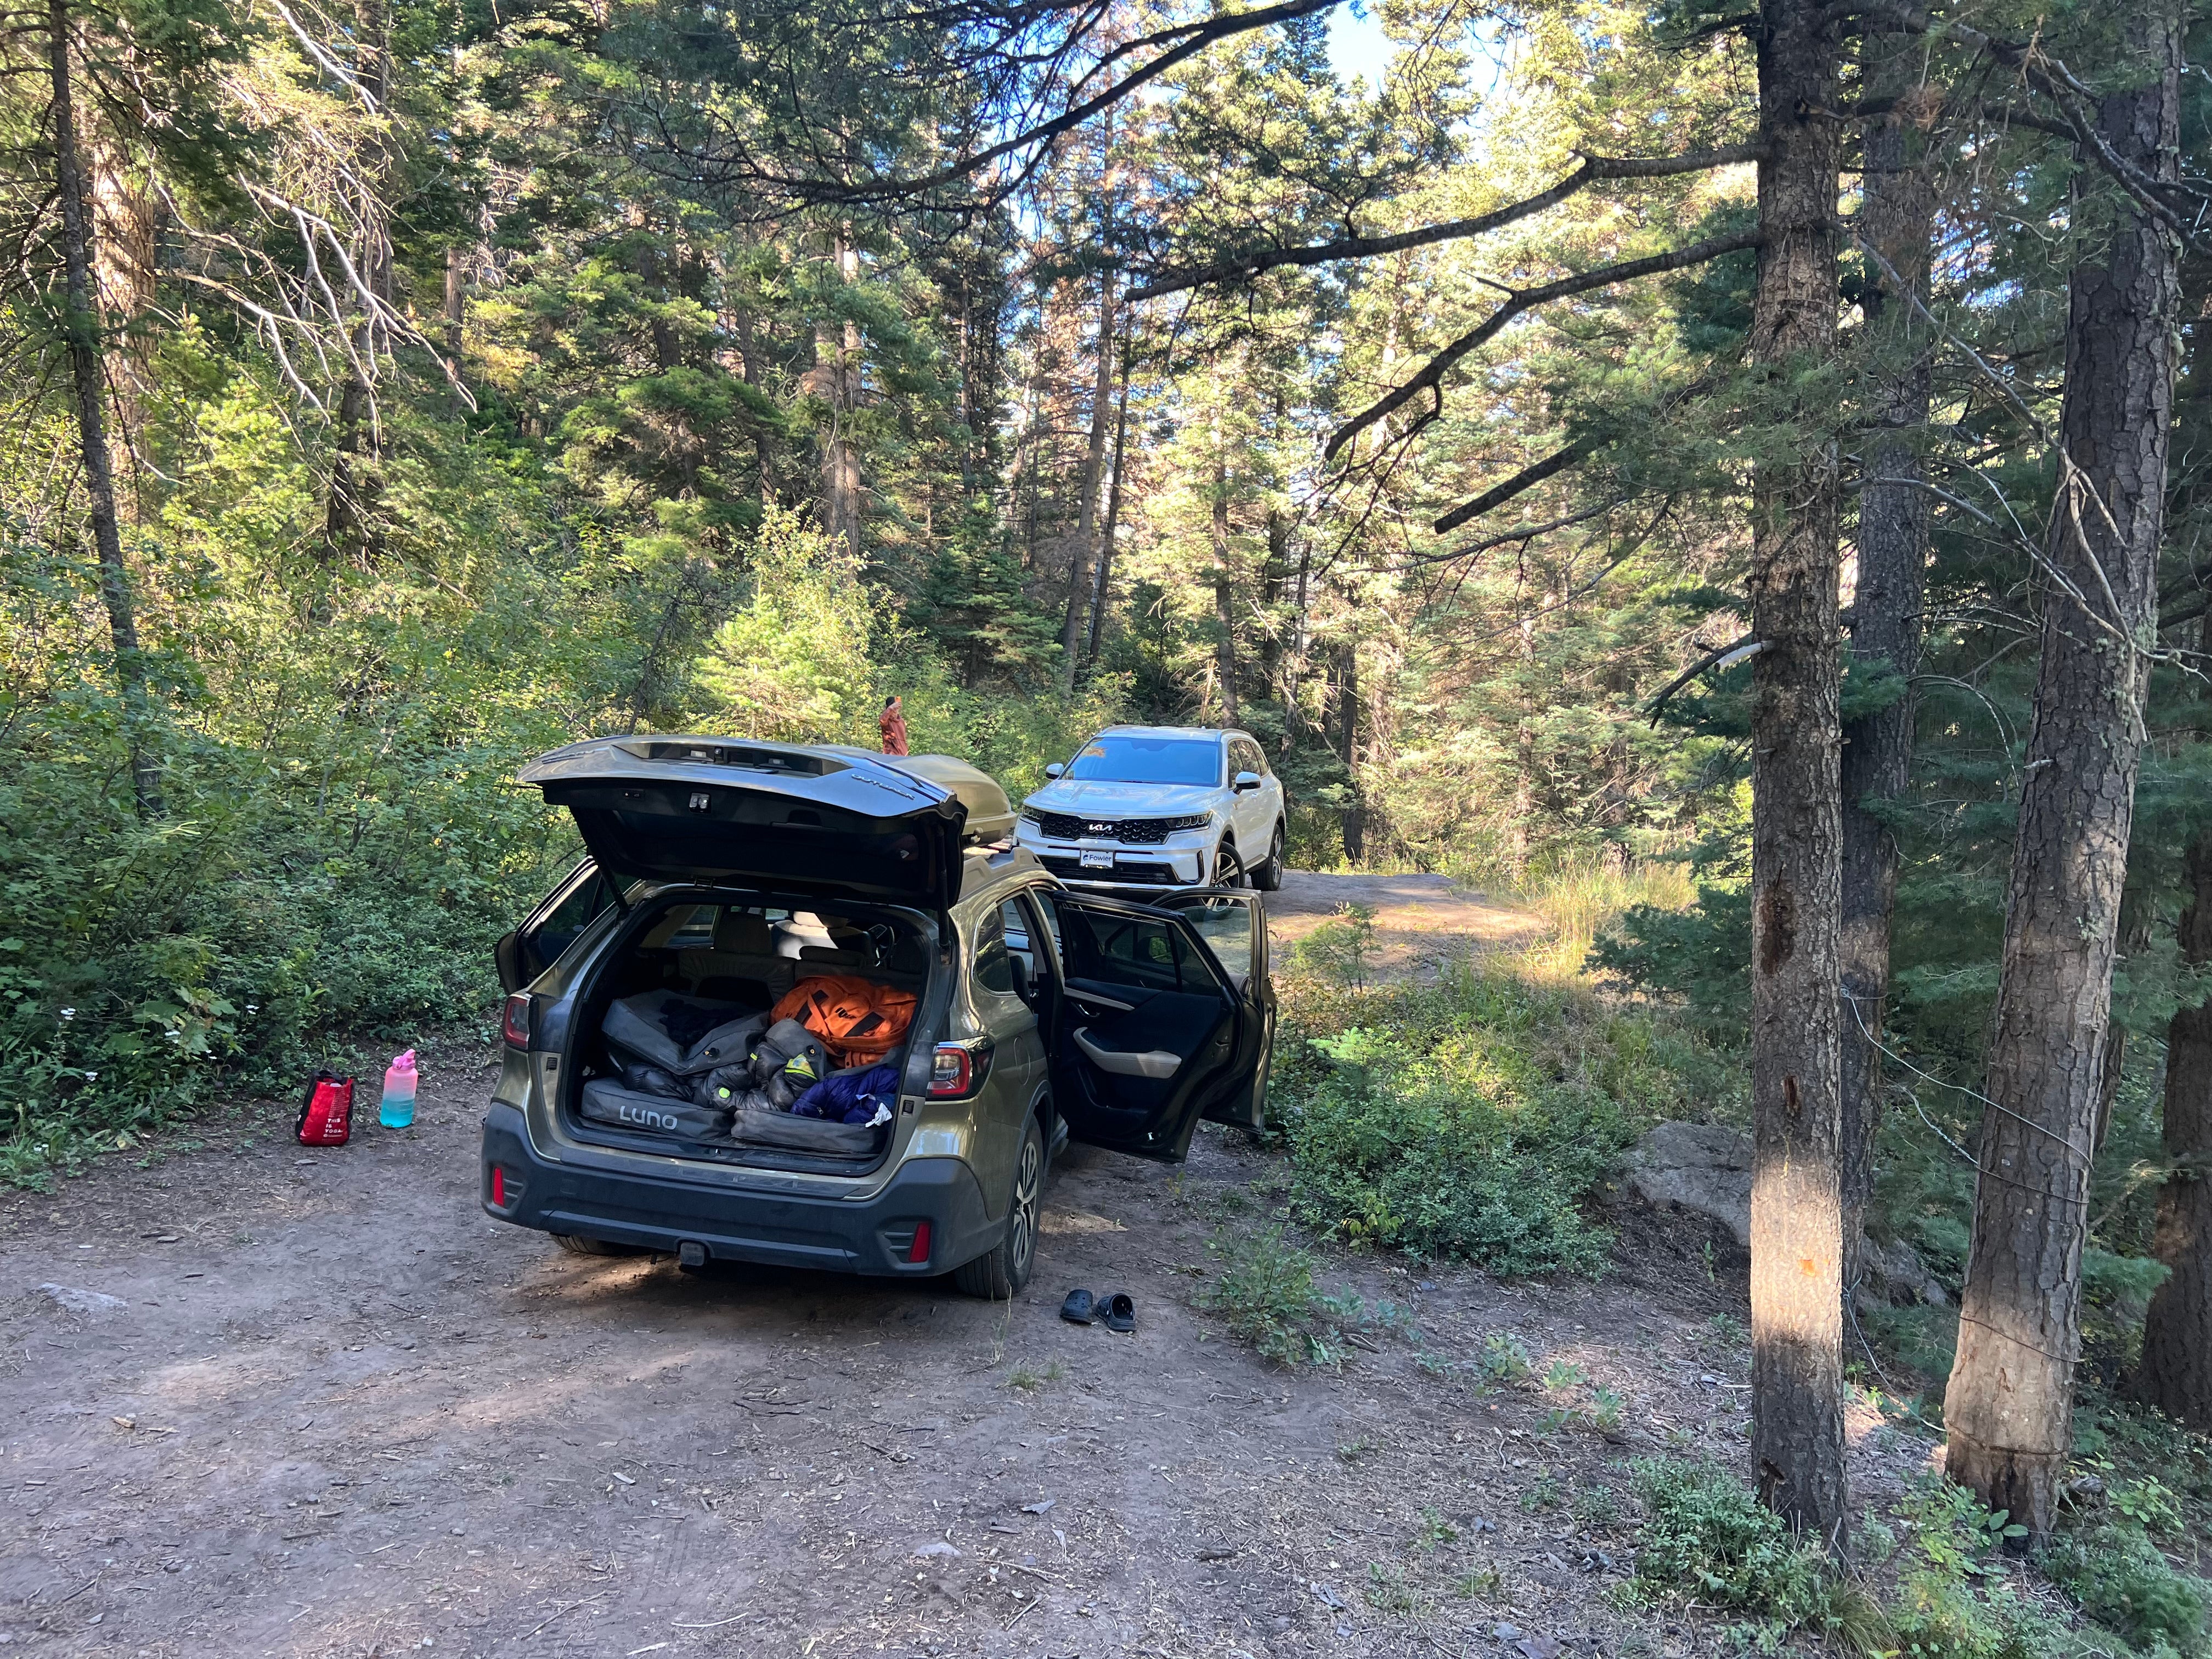 Camper submitted image from County Road 14, Dexter Creek Backcountry - 5